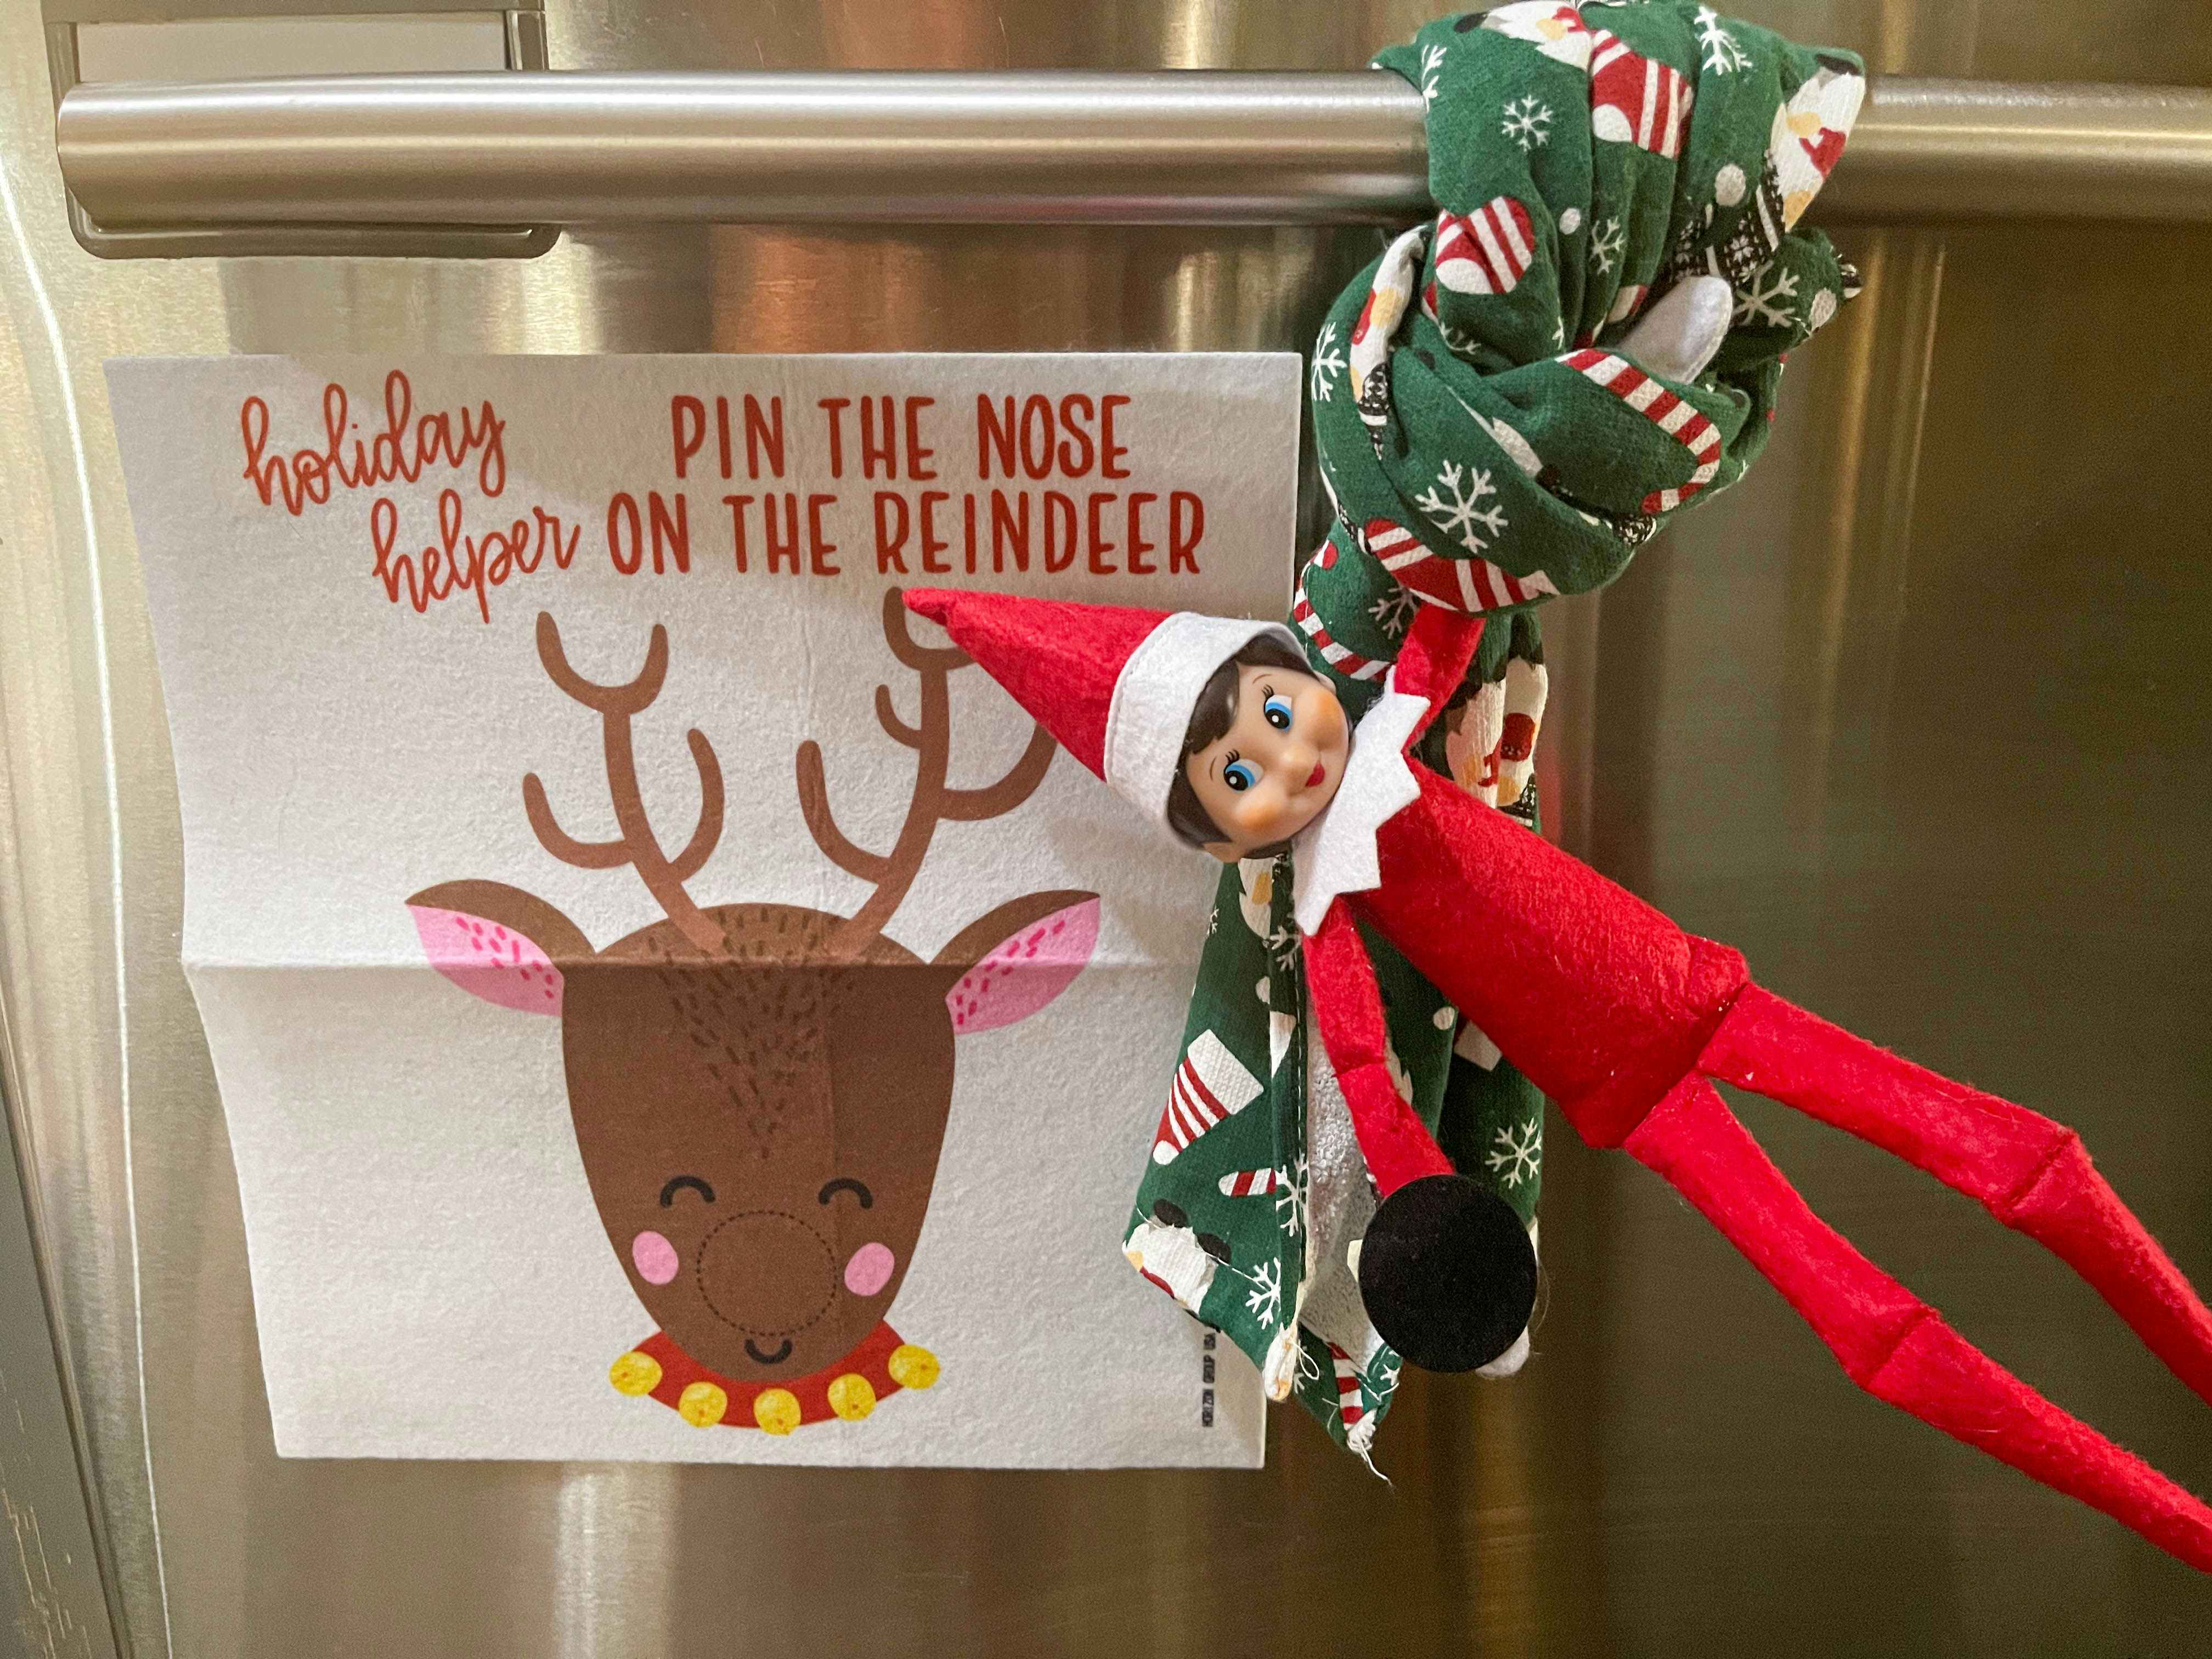 an elf on the shelf doll playing pin the nose on the reindeer holding on a kitchen towel